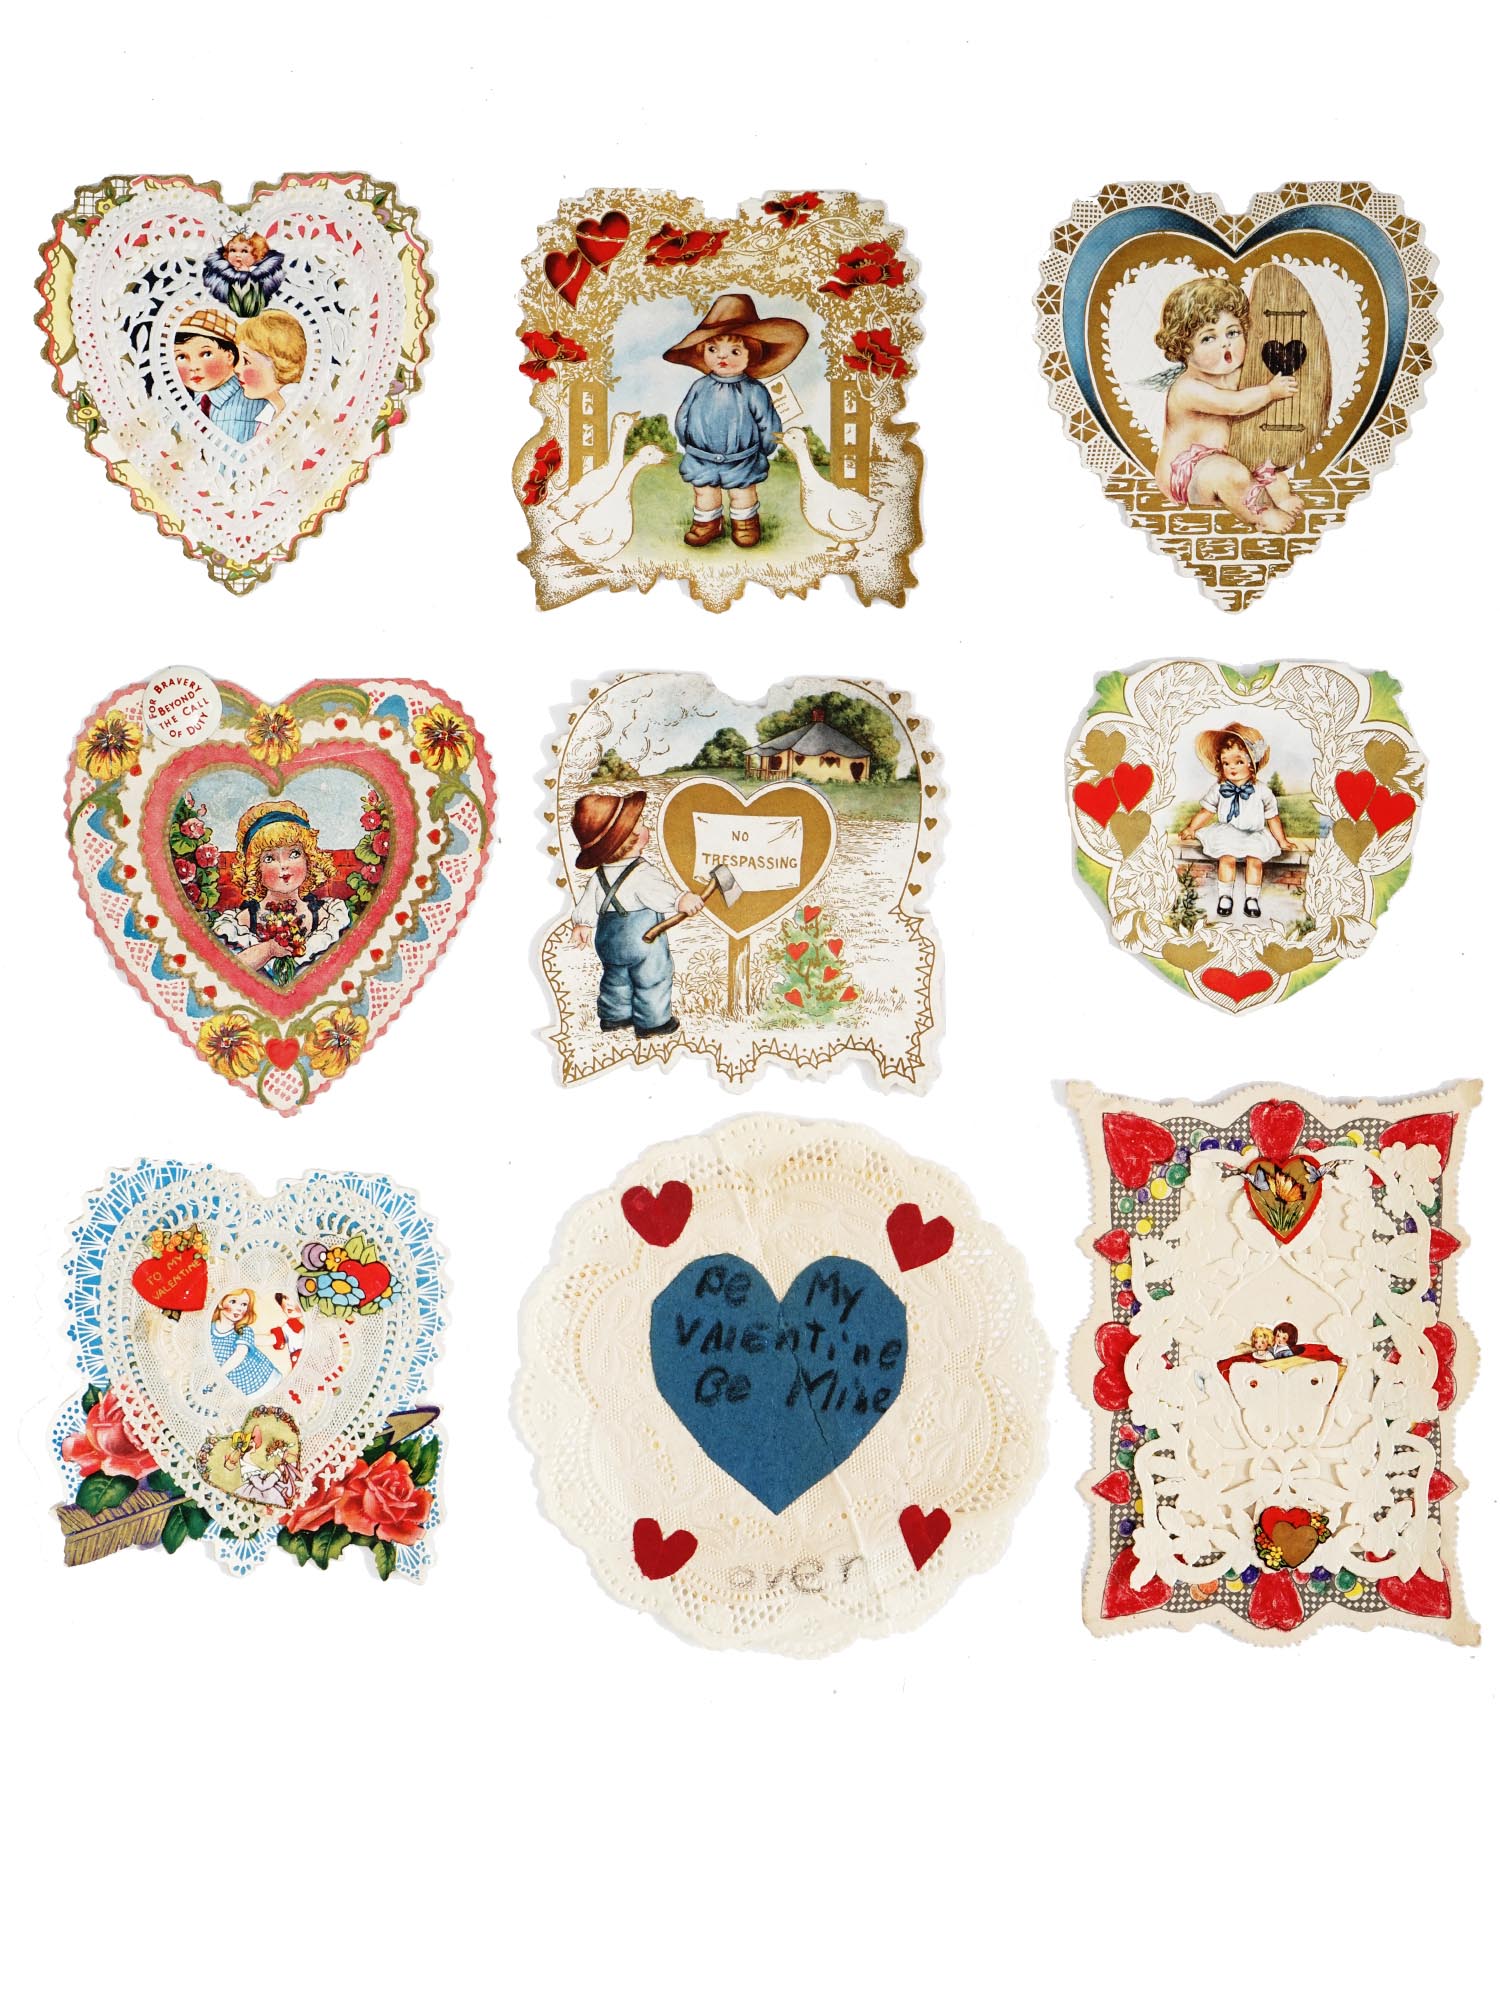 ANTIQUE VALENTINES DAY CARDS COLLECTION IN ALBUM PIC-11